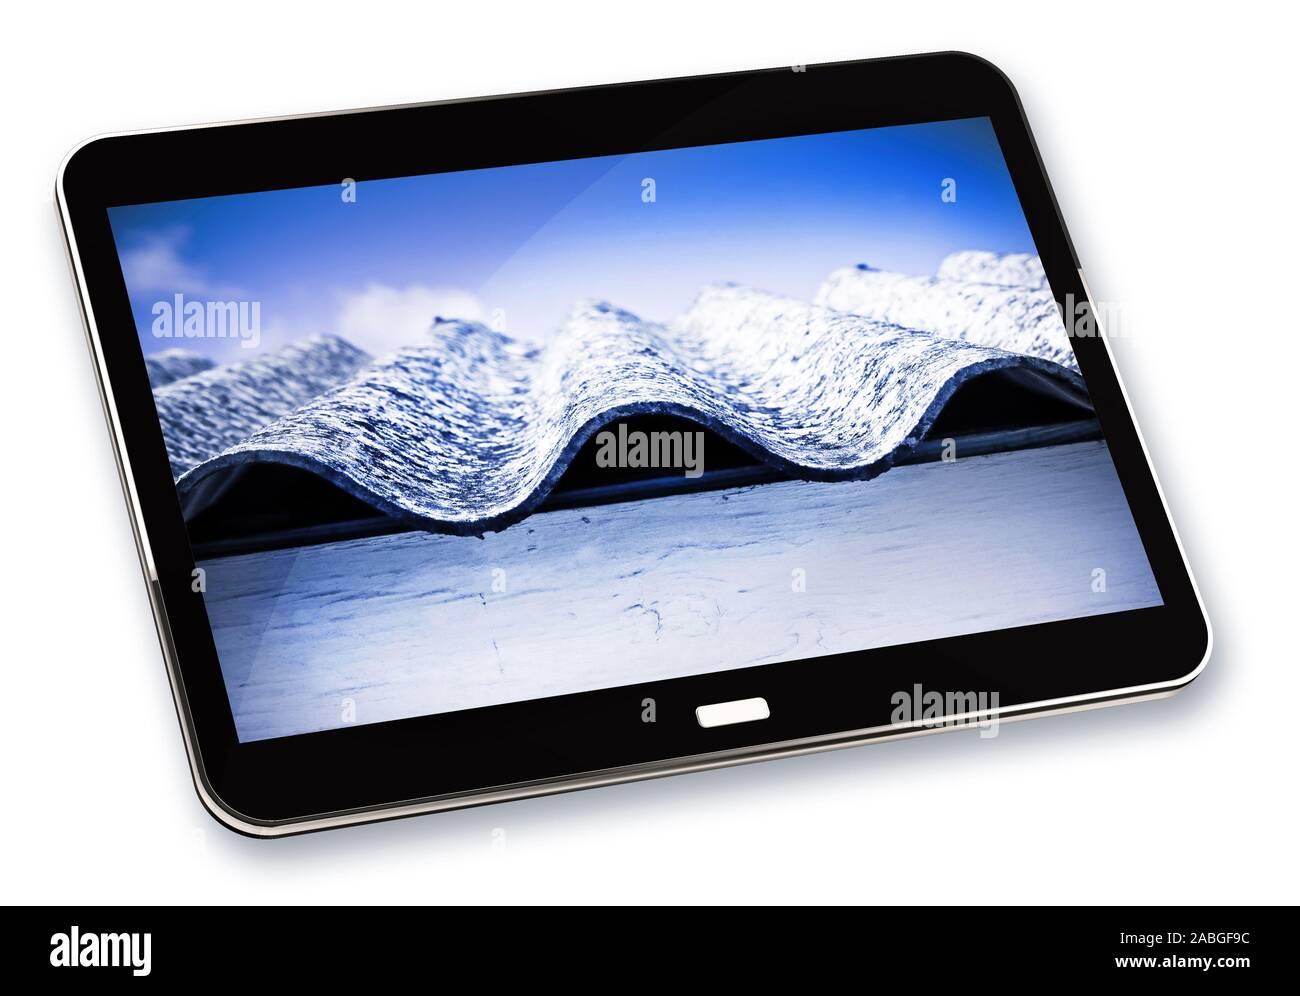 Asbestos roof: one of the most dangerous materials in the construction industry - Concept image with 3D render of a digital tablet on white background Stock Photo